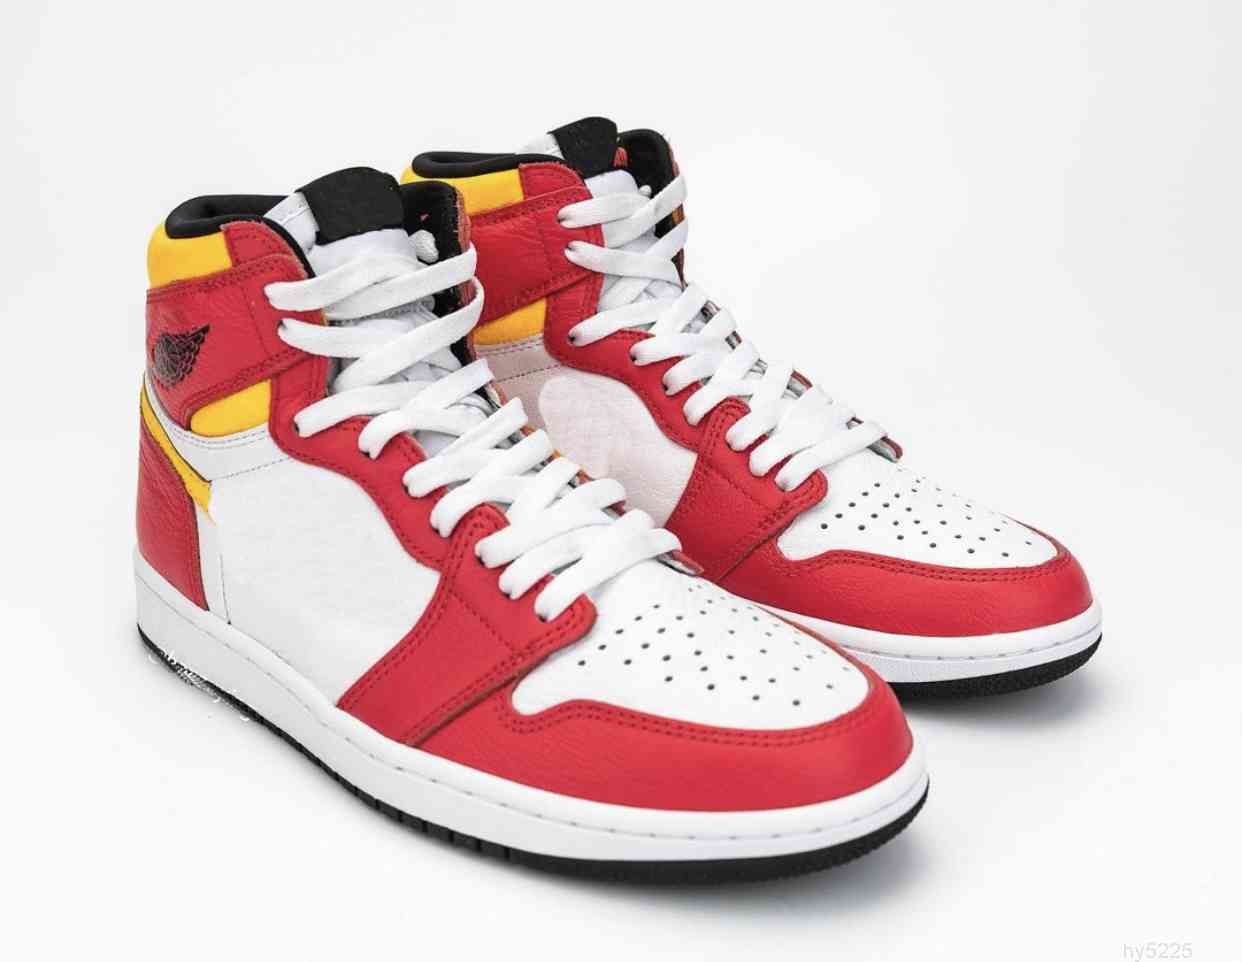 

2021 Authentic 1 Light Fusion Red 1s High Men Outdoor Shoes 555088-603 White Laser Orange Black Retro Sports Sneakers With Box